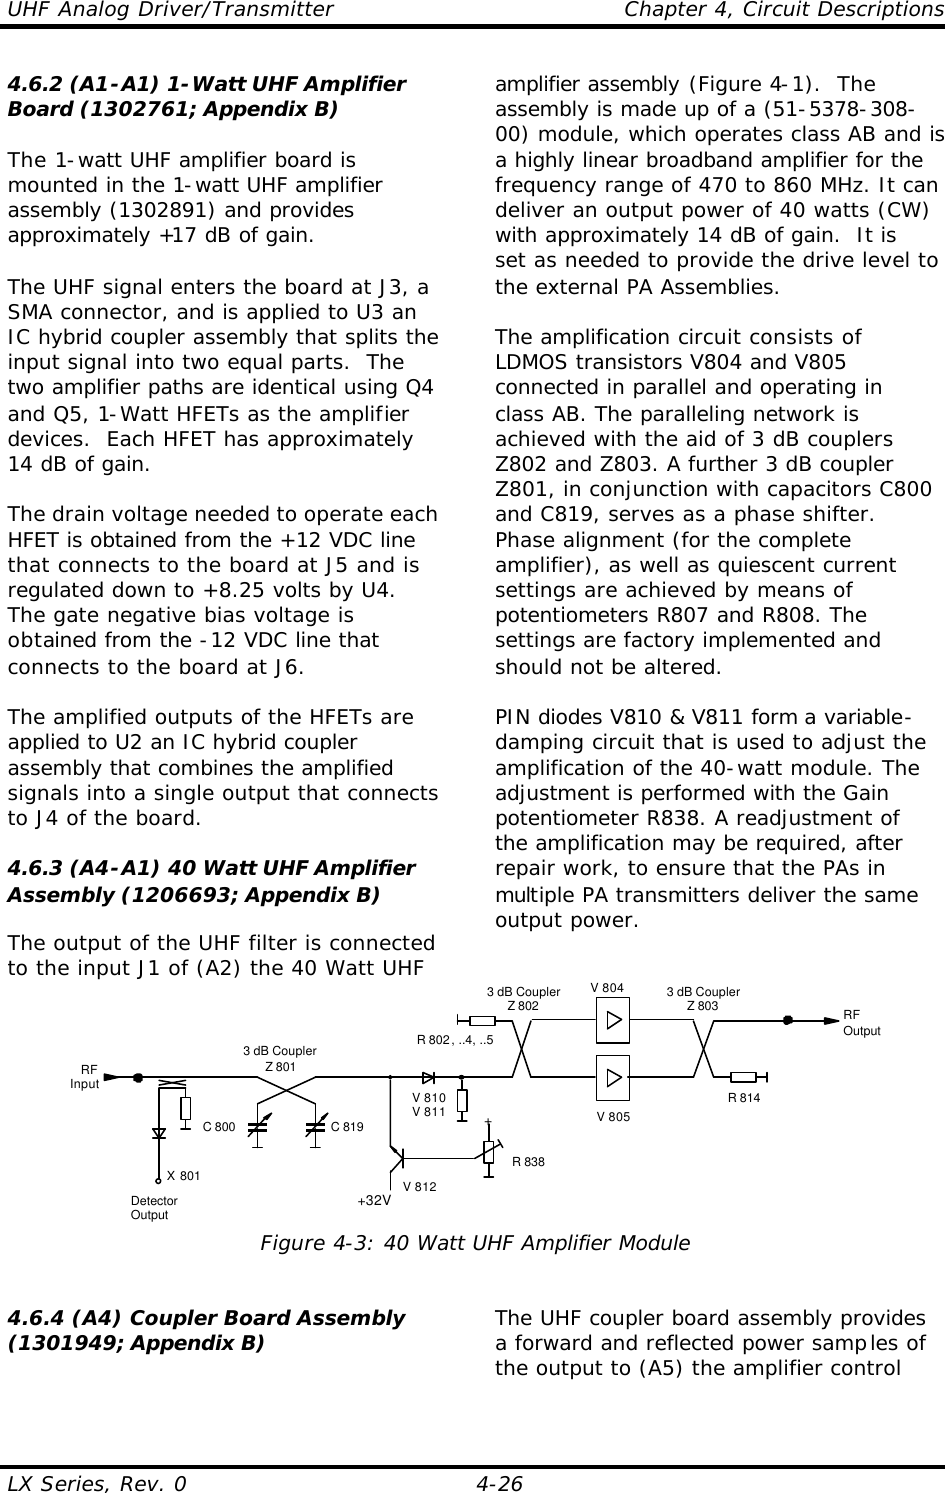 UHF Analog Driver/Transmitter    Chapter 4, Circuit Descriptions LX Series, Rev. 0    4-26 4.6.2 (A1-A1) 1-Watt UHF Amplifier Board (1302761; Appendix B)  The 1-watt UHF amplifier board is mounted in the 1-watt UHF amplifier assembly (1302891) and provides approximately +17 dB of gain.  The UHF signal enters the board at J3, a SMA connector, and is applied to U3 an IC hybrid coupler assembly that splits the input signal into two equal parts.  The two amplifier paths are identical using Q4 and Q5, 1-Watt HFETs as the amplifier devices.  Each HFET has approximately 14 dB of gain.    The drain voltage needed to operate each HFET is obtained from the +12 VDC line that connects to the board at J5 and is regulated down to +8.25 volts by U4.  The gate negative bias voltage is obtained from the -12 VDC line that connects to the board at J6.  The amplified outputs of the HFETs are applied to U2 an IC hybrid coupler assembly that combines the amplified signals into a single output that connects to J4 of the board.  4.6.3 (A4-A1) 40 Watt UHF Amplifier Assembly (1206693; Appendix B)  The output of the UHF filter is connected to the input J1 of (A2) the 40 Watt UHF amplifier assembly (Figure 4-1).  The assembly is made up of a (51-5378-308-00) module, which operates class AB and is a highly linear broadband amplifier for the frequency range of 470 to 860 MHz. It can deliver an output power of 40 watts (CW) with approximately 14 dB of gain.  It is set as needed to provide the drive level to the external PA Assemblies.  The amplification circuit consists of LDMOS transistors V804 and V805 connected in parallel and operating in class AB. The paralleling network is achieved with the aid of 3 dB couplers Z802 and Z803. A further 3 dB coupler Z801, in conjunction with capacitors C800 and C819, serves as a phase shifter. Phase alignment (for the complete amplifier), as well as quiescent current settings are achieved by means of potentiometers R807 and R808. The settings are factory implemented and should not be altered.  PIN diodes V810 &amp; V811 form a variable-damping circuit that is used to adjust the amplification of the 40-watt module. The adjustment is performed with the Gain potentiometer R838. A readjustment of the amplification may be required, after repair work, to ensure that the PAs in multiple PA transmitters deliver the same output power. V 805V 8043 dB CouplerZ 801RFOutputRFInput R 814R 802, ..4, ..5C 800 C 819DetectorOutputX 801+32V+R 838V 810V 811V 8123 dB CouplerZ 802 3 dB CouplerZ 803 Figure 4-3: 40 Watt UHF Amplifier Module  4.6.4 (A4) Coupler Board Assembly (1301949; Appendix B)  The UHF coupler board assembly provides a forward and reflected power samples of the output to (A5) the amplifier control 